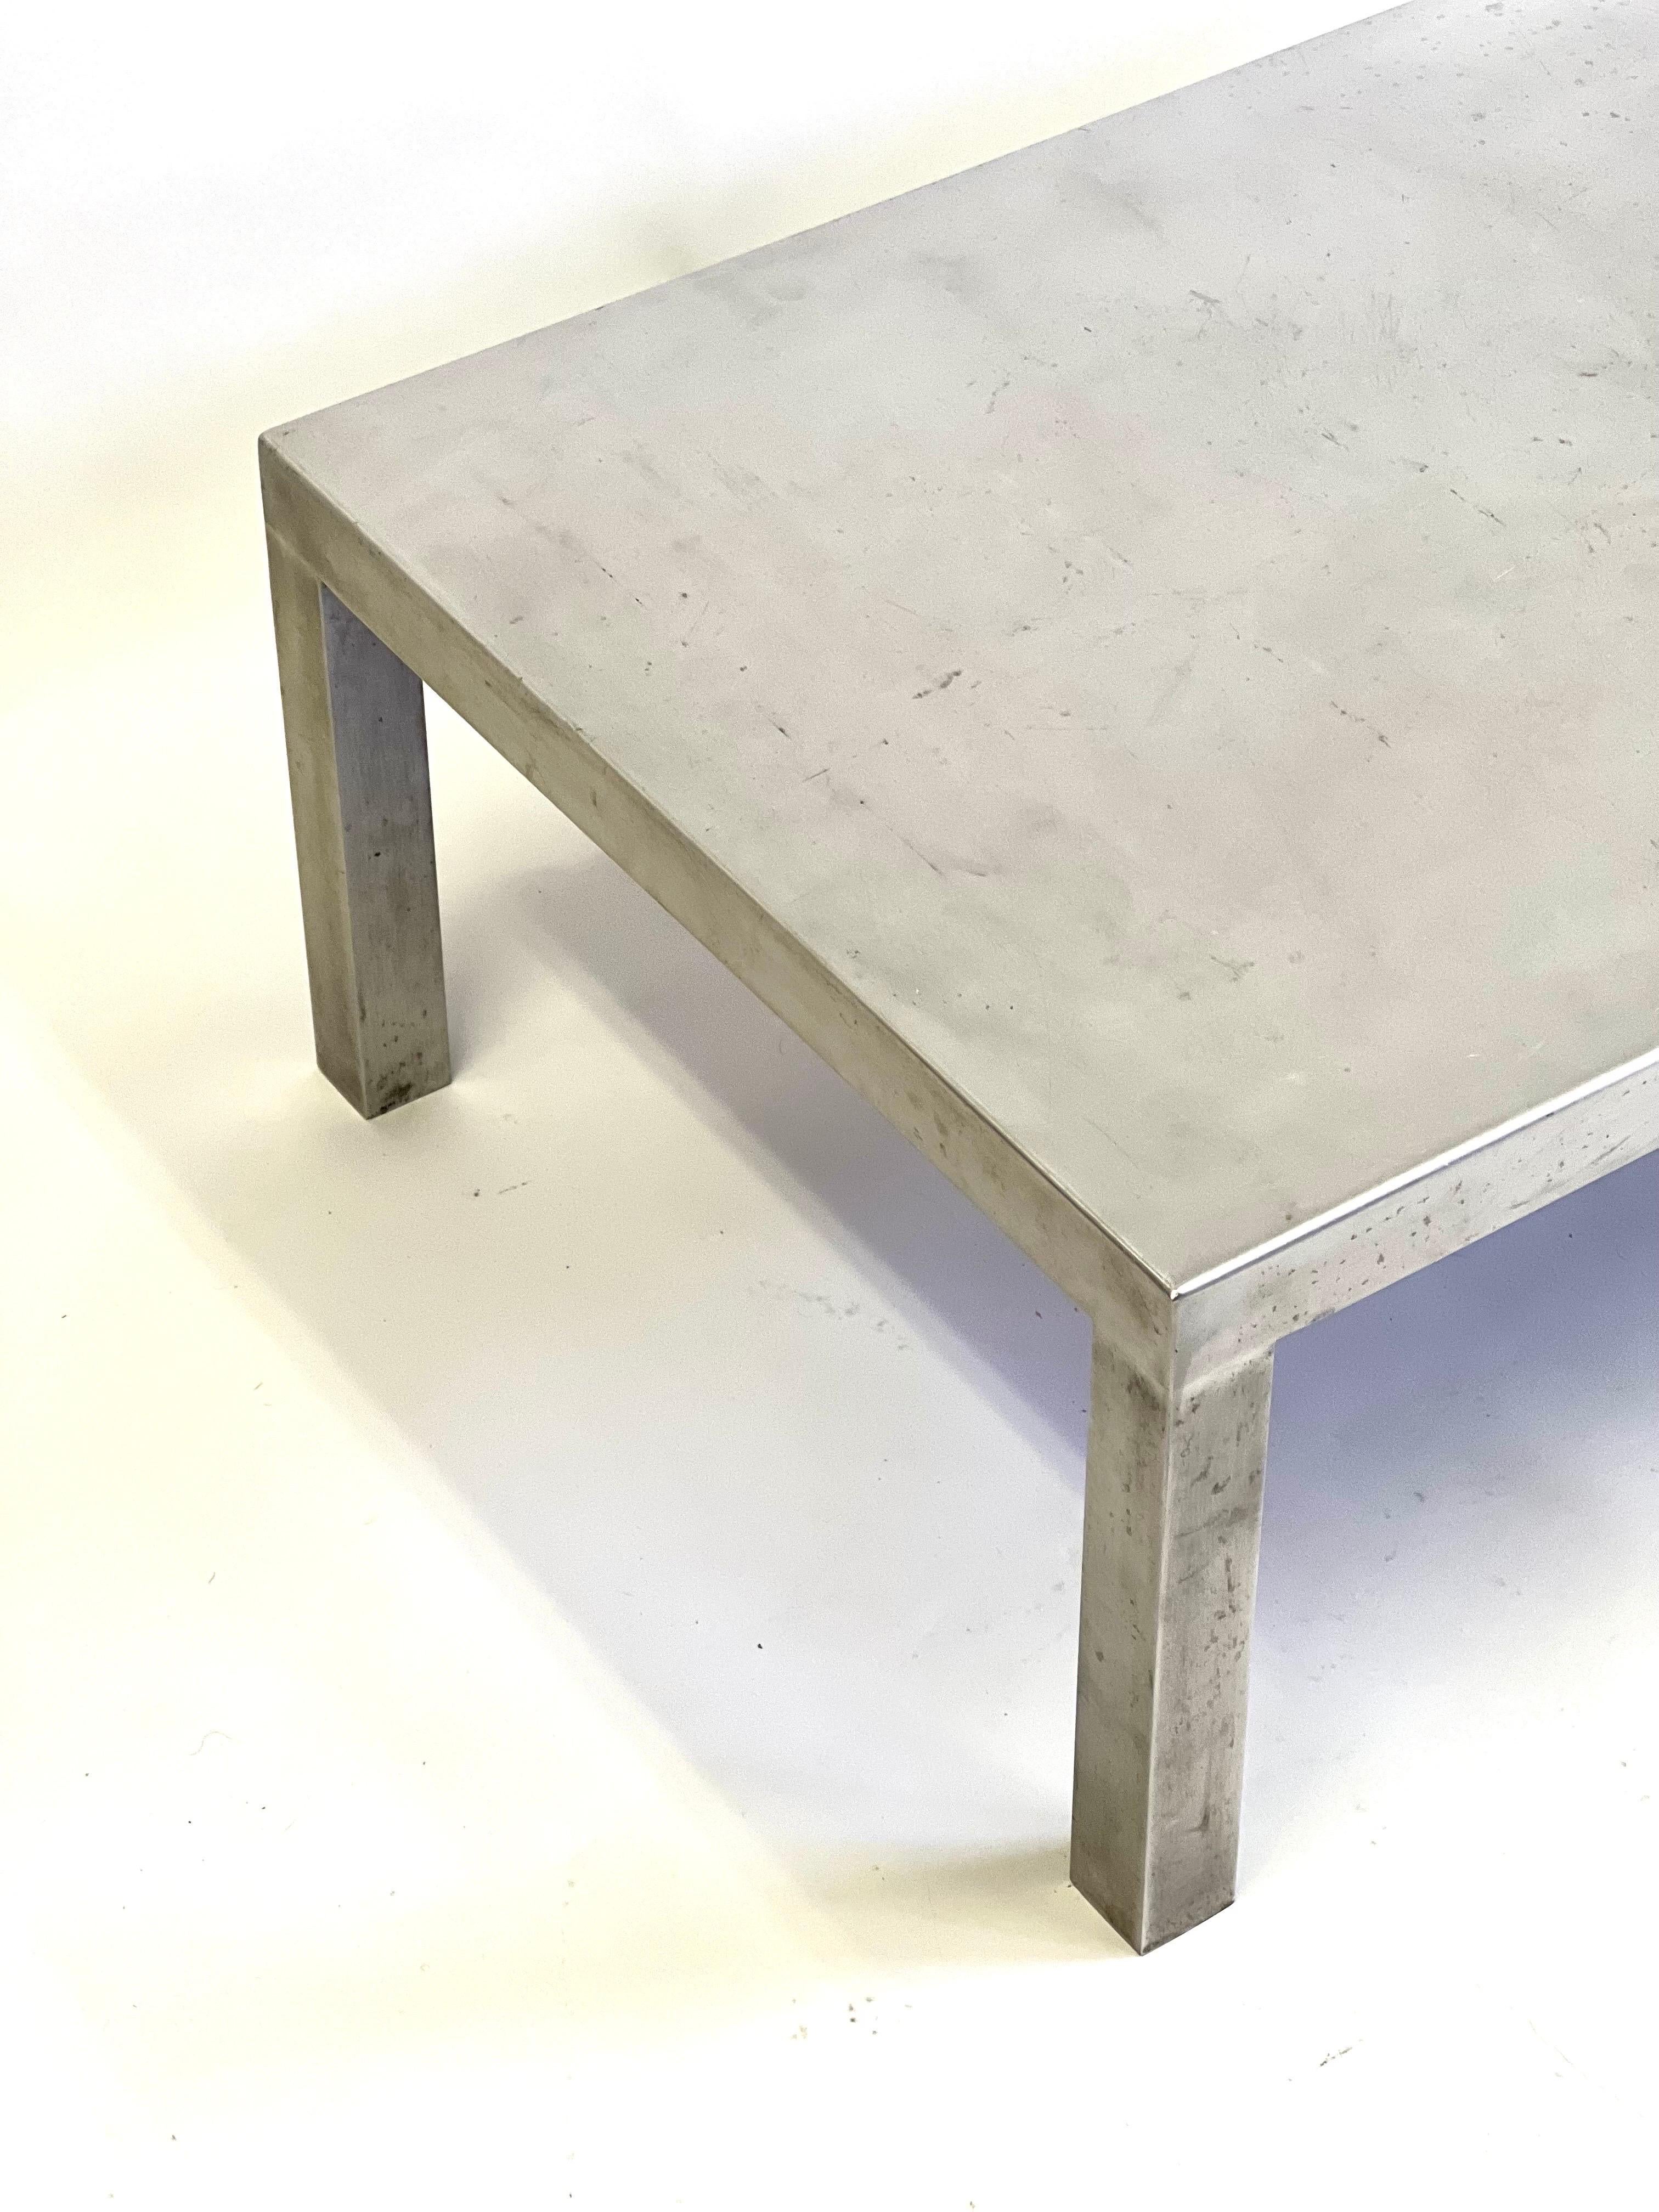 French Mid-Century Modern Matte Stainless Steel Coffee Table, Maria Pergay, 1971 For Sale 1